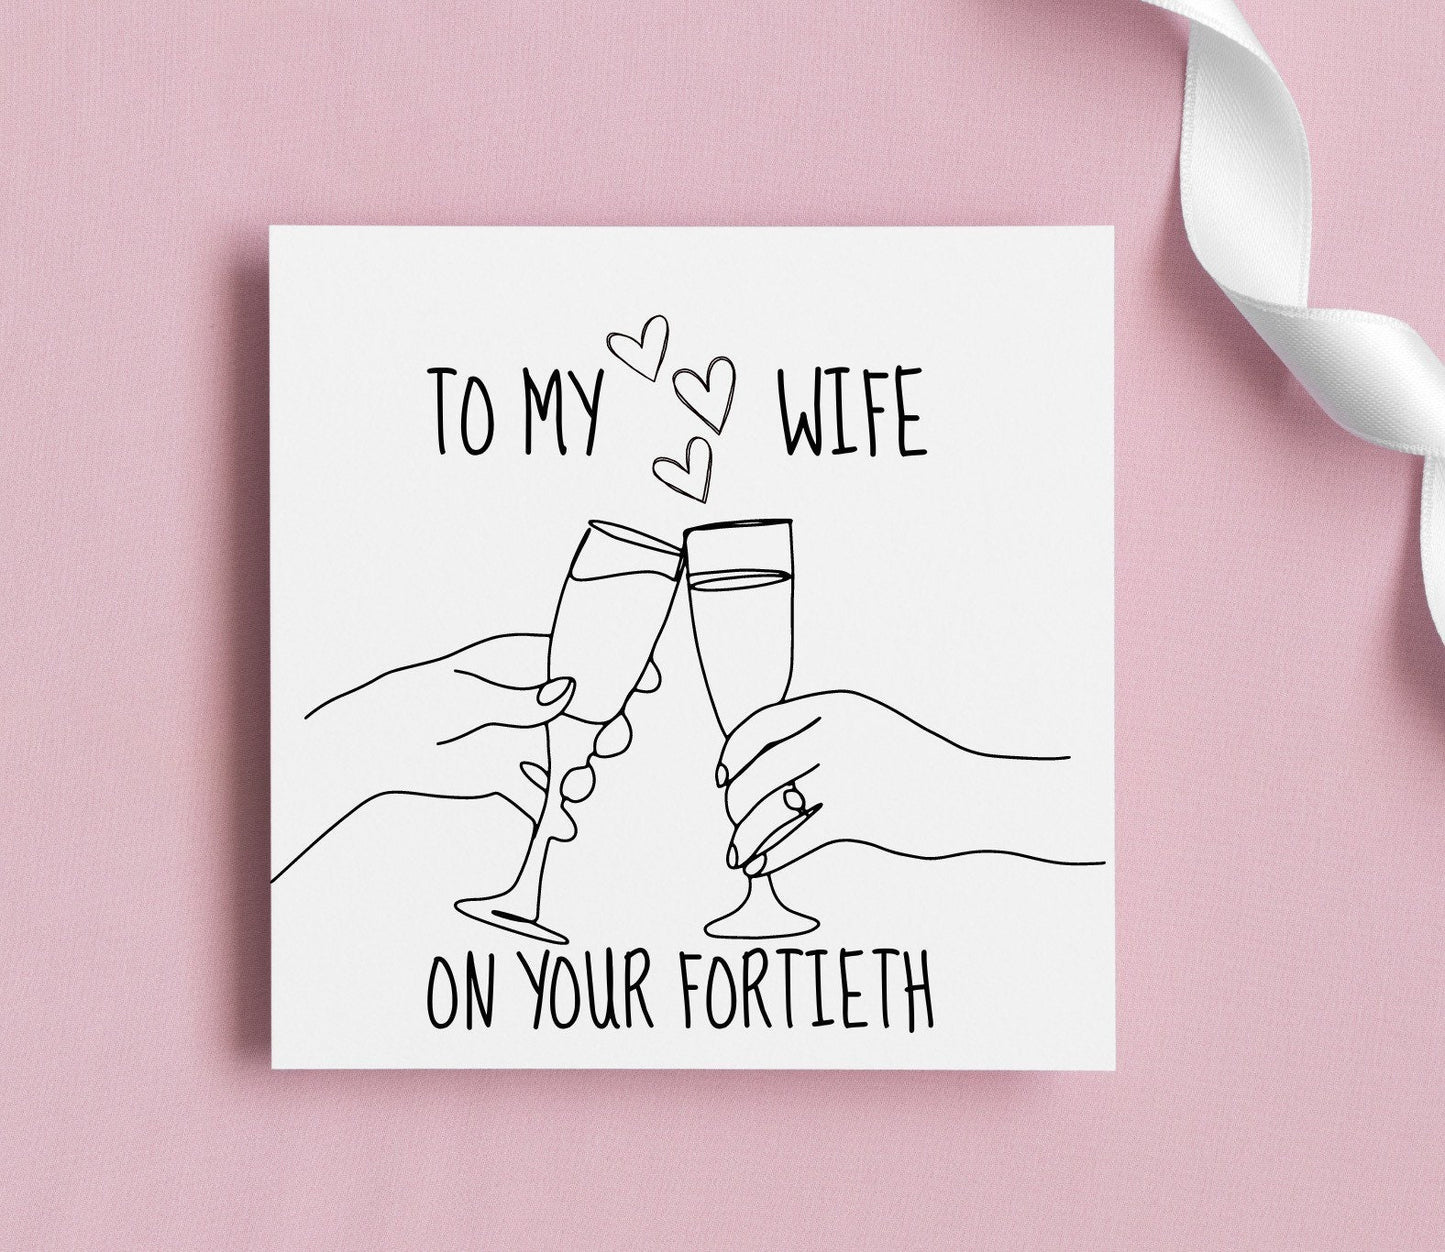 To my wife on your 50th birthday card, happy 40th greeting card for husband or wife, age birthday cards, milestone bday, monochrome cards